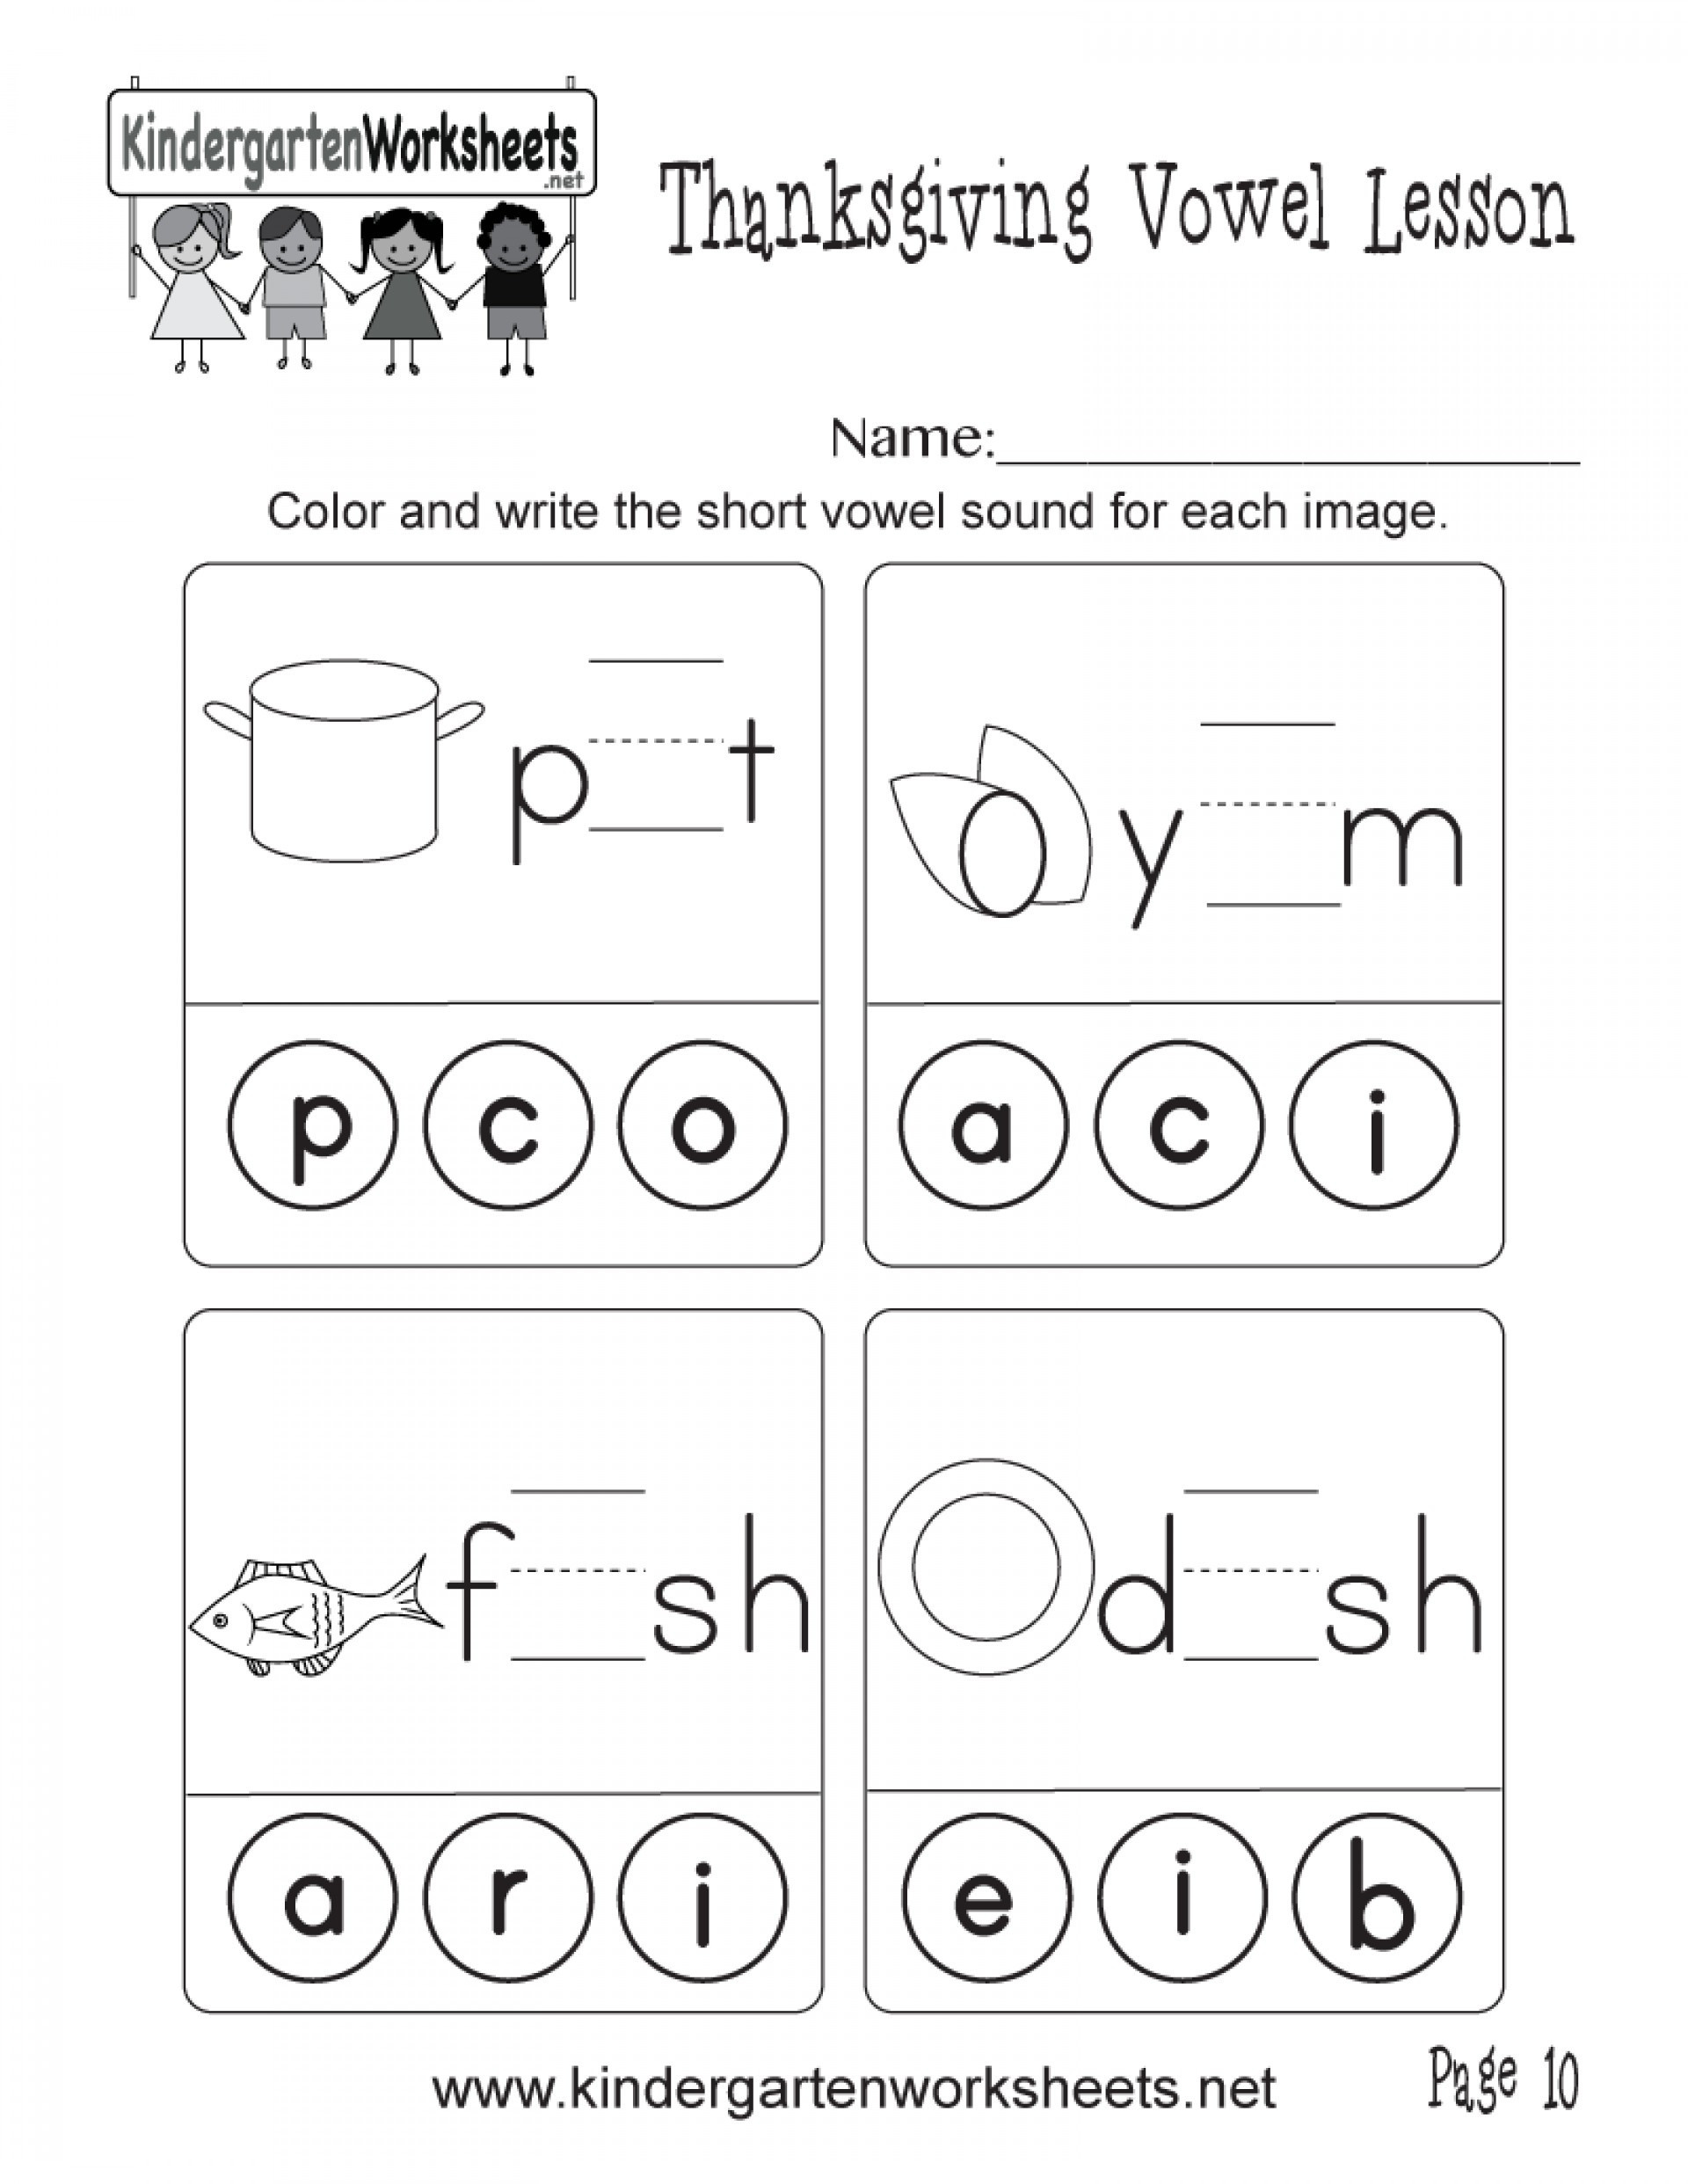 Free Printable Long Vowel Worksheets 6 Long and Short Vowel sounds Worksheets – Learning Worksheets